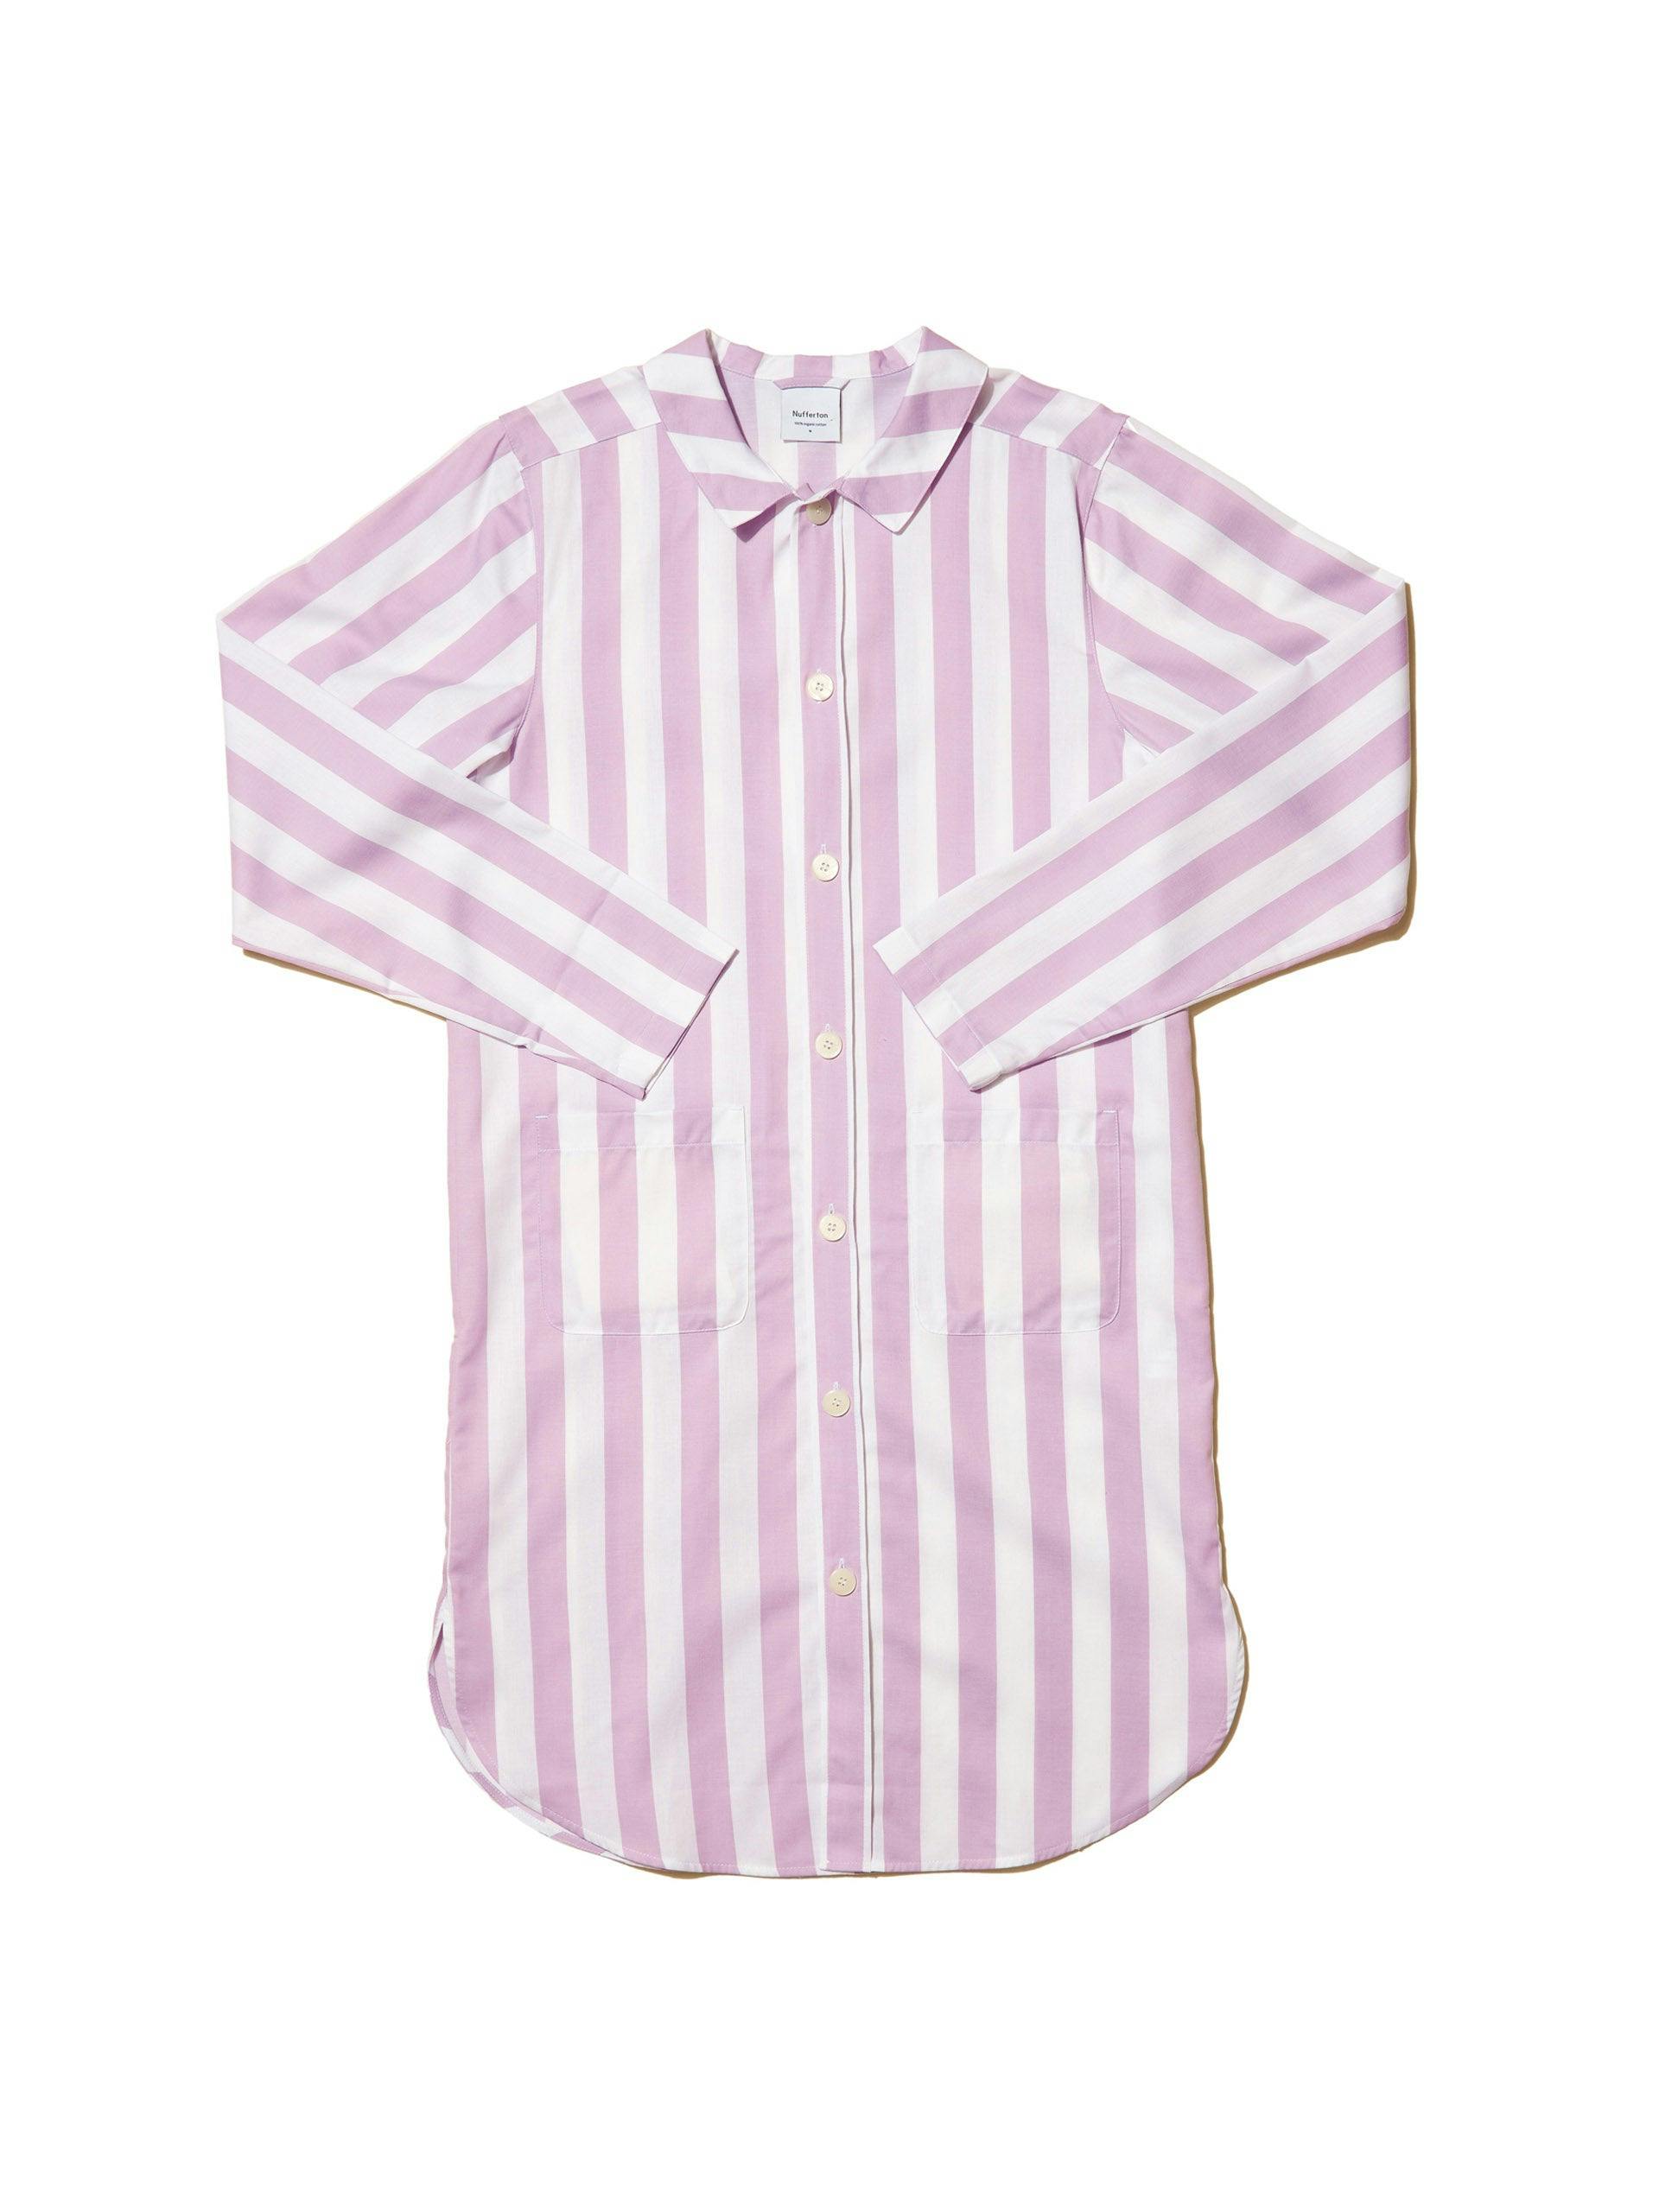 Lavender and white long nightshirt